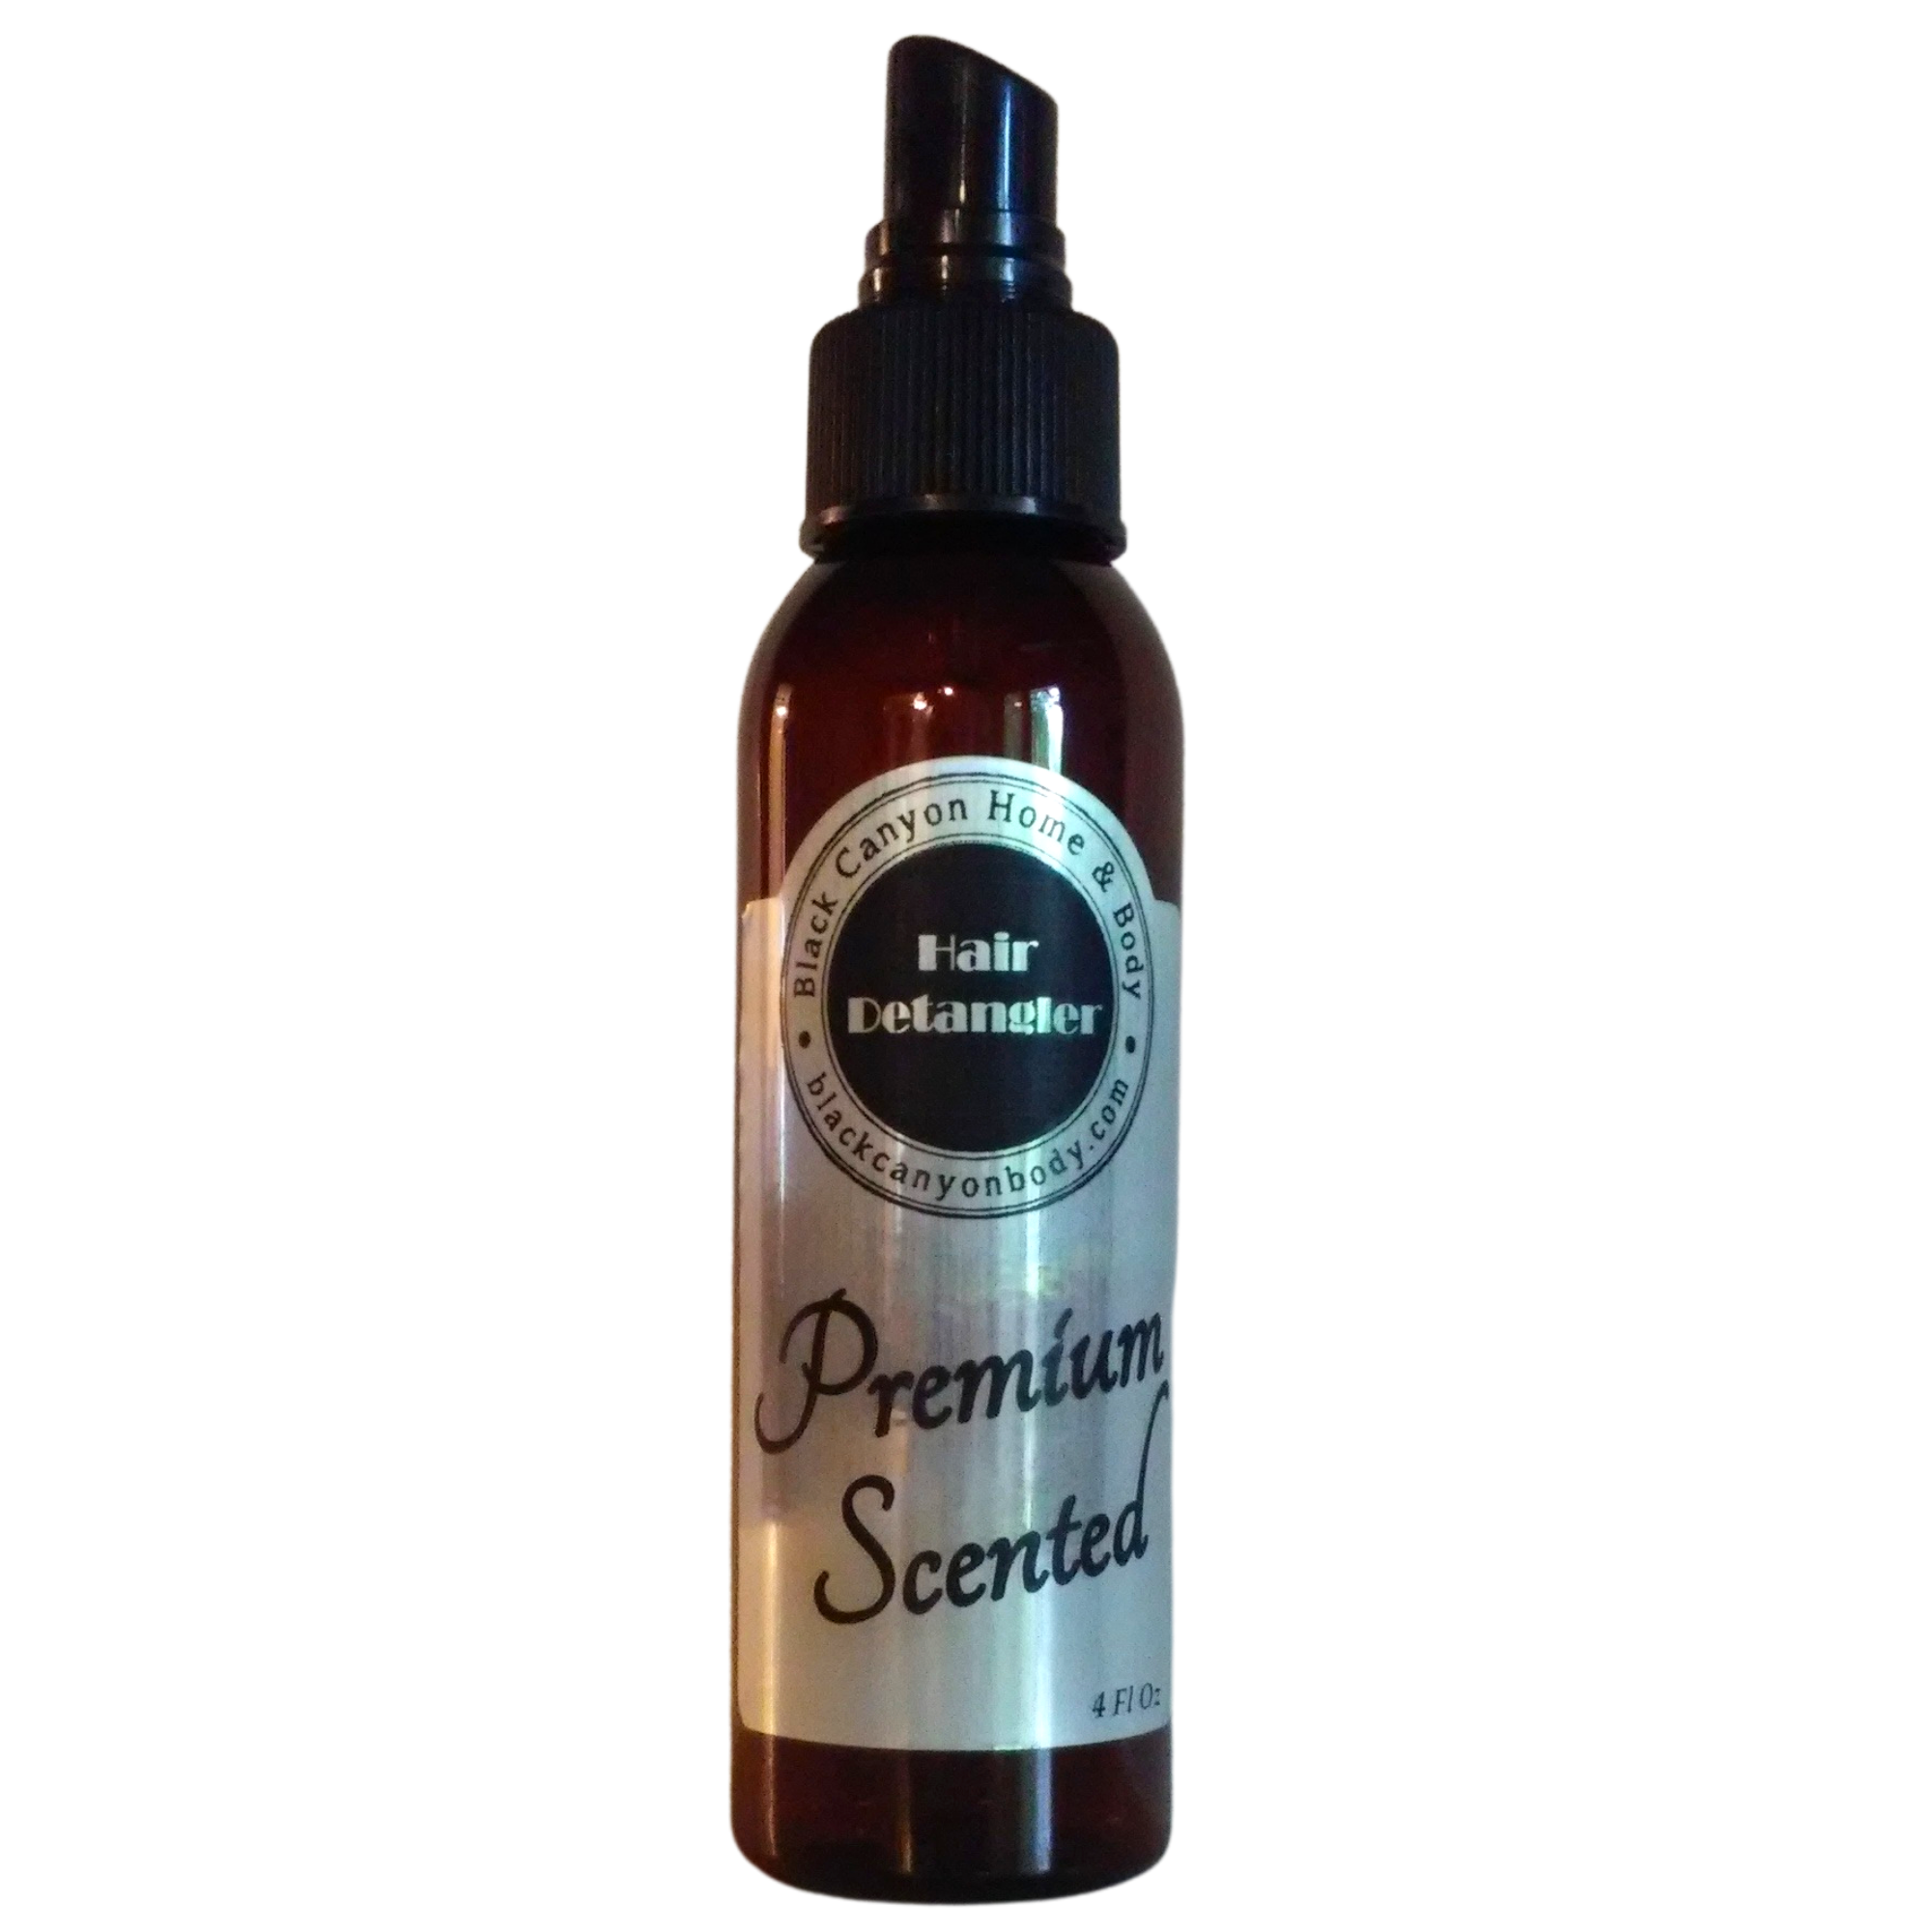 Black Canyon Green Apple & Lily Rose Scented Hair Detangler Spray with Olive Oil